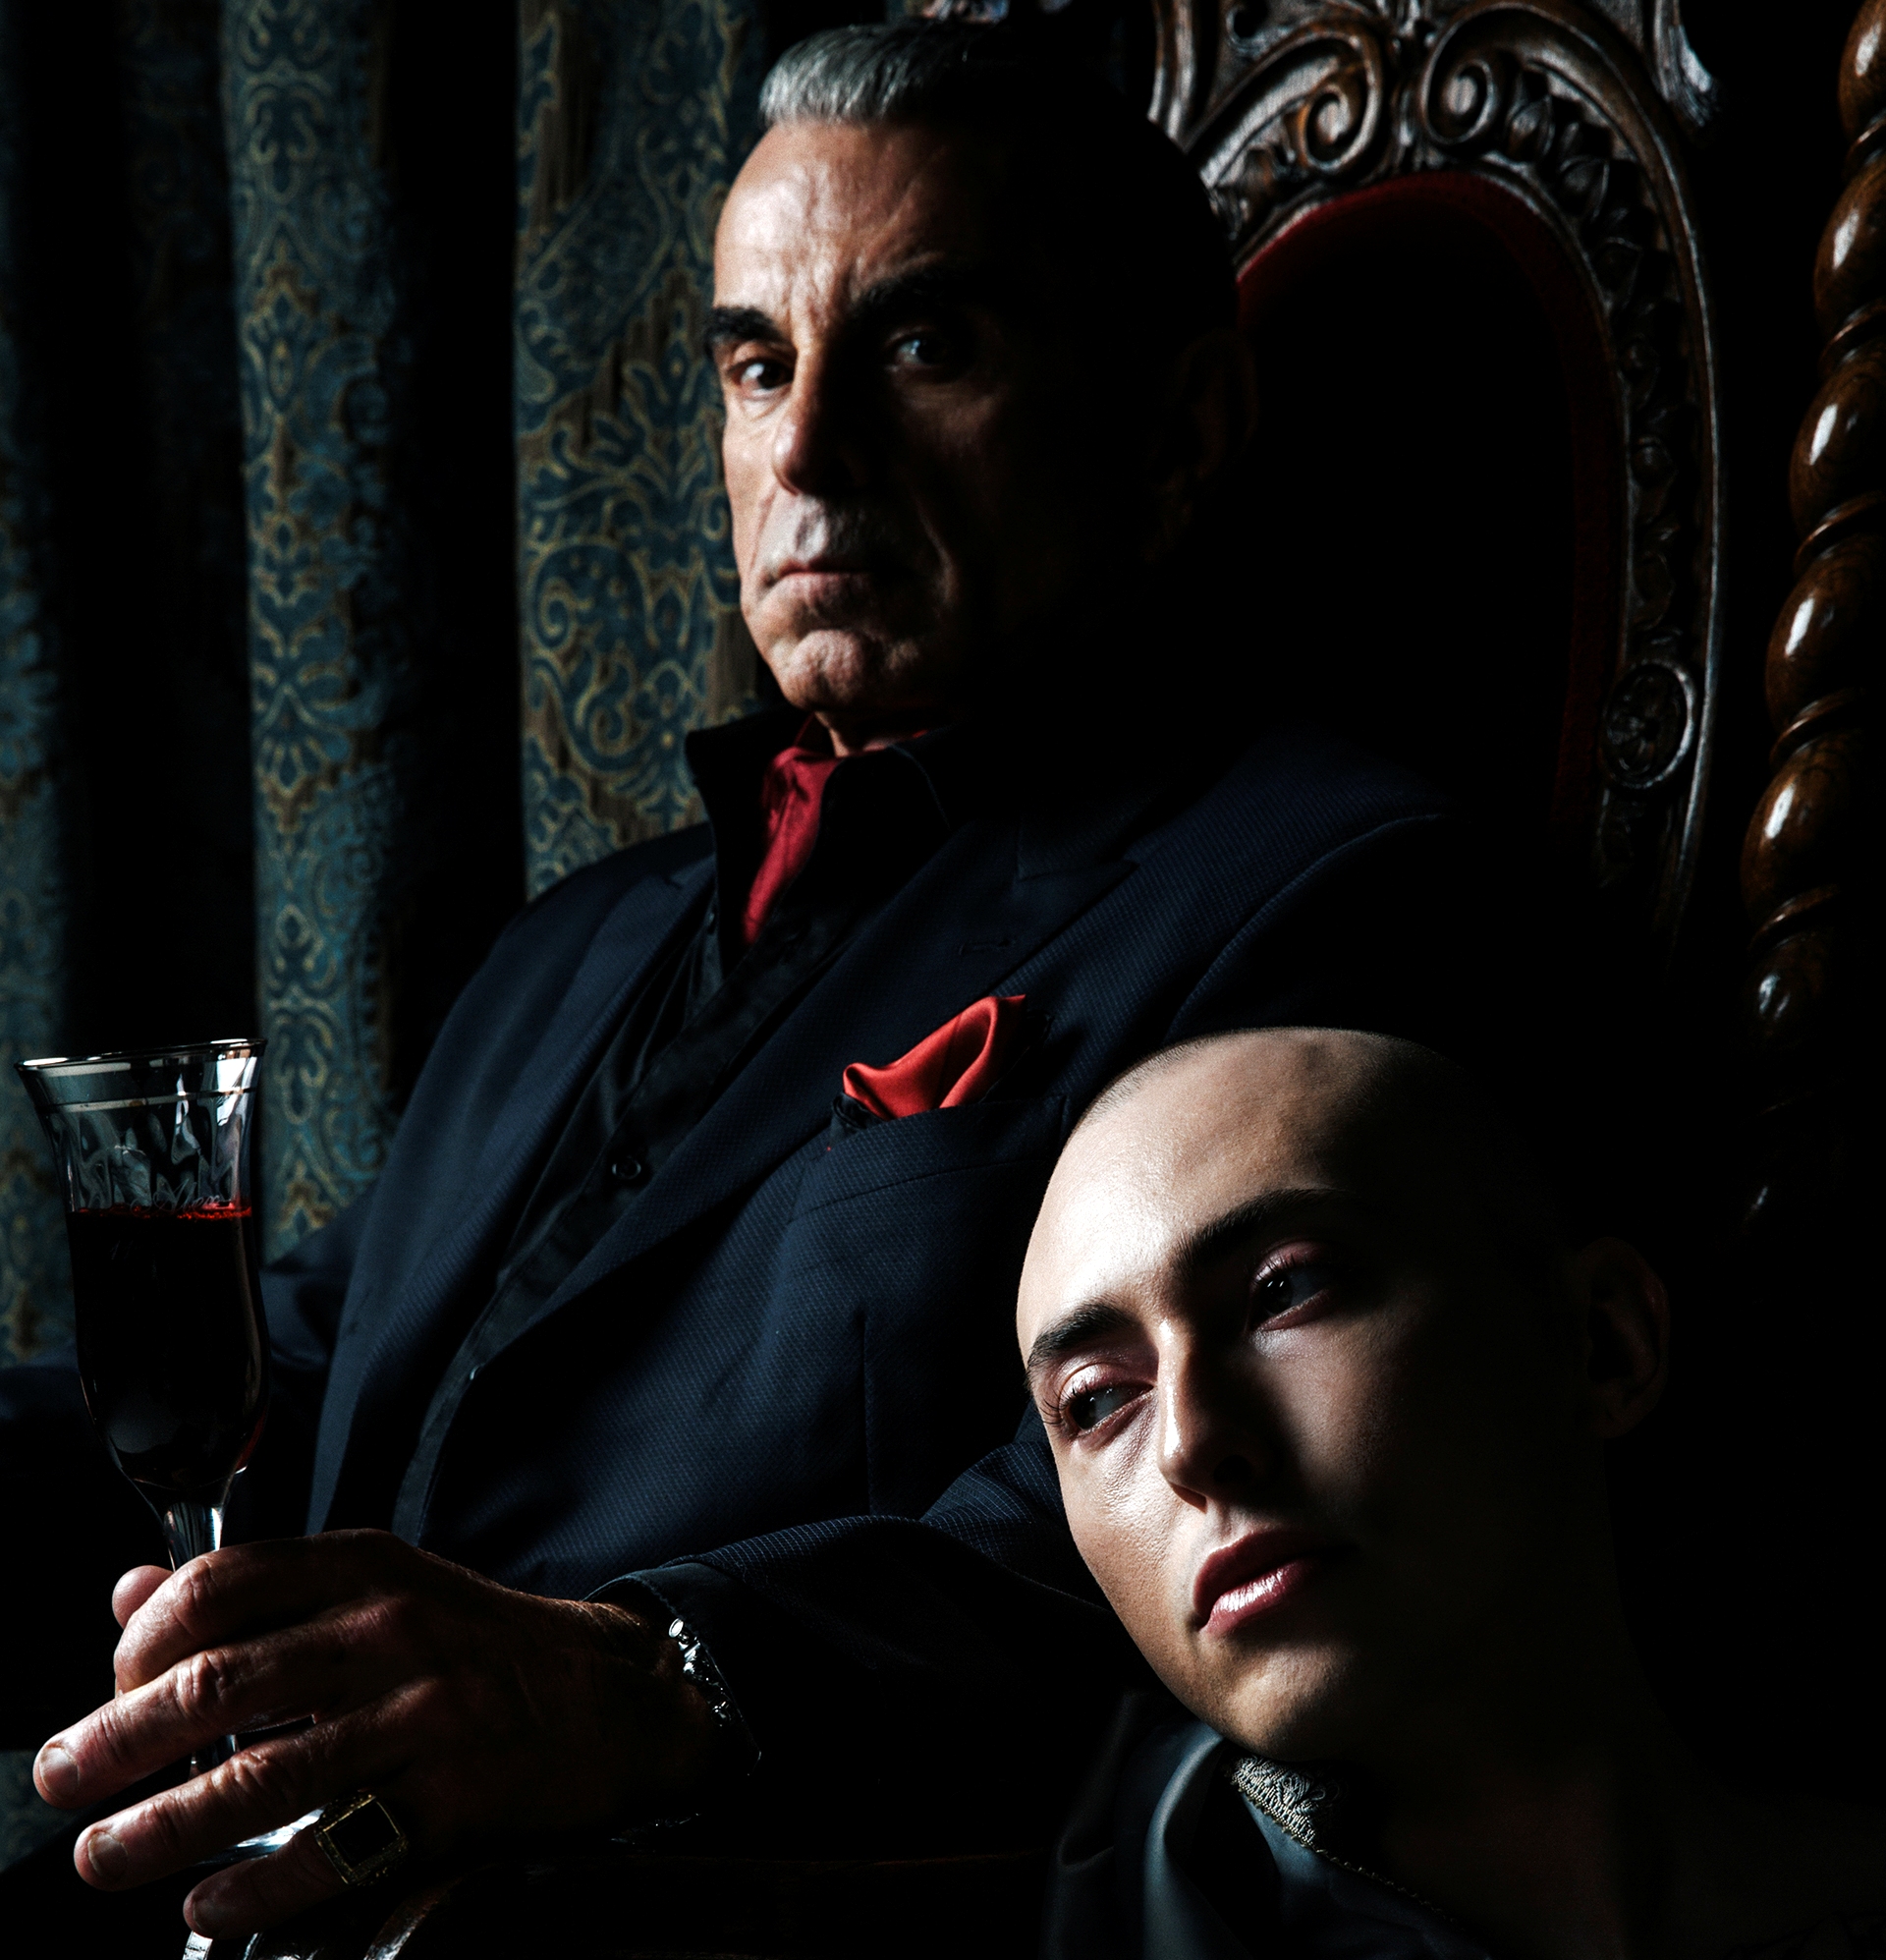 vampire in nice suit, red cravat, red pocket square, glass of wine on a throne with a bald servant at his knee